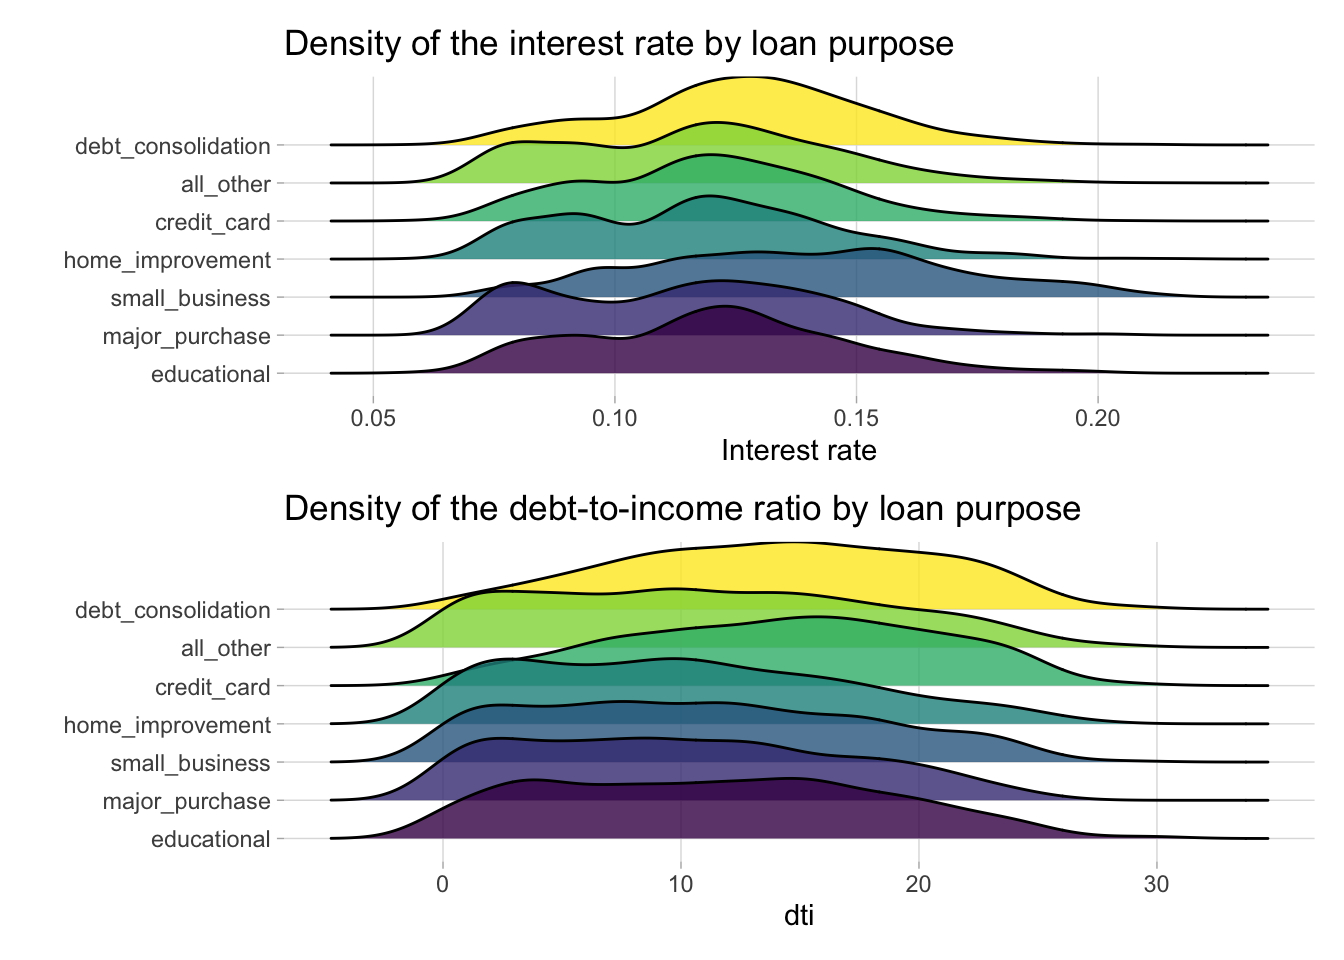 Density plots of interest rate and debt-to-interest across loan types